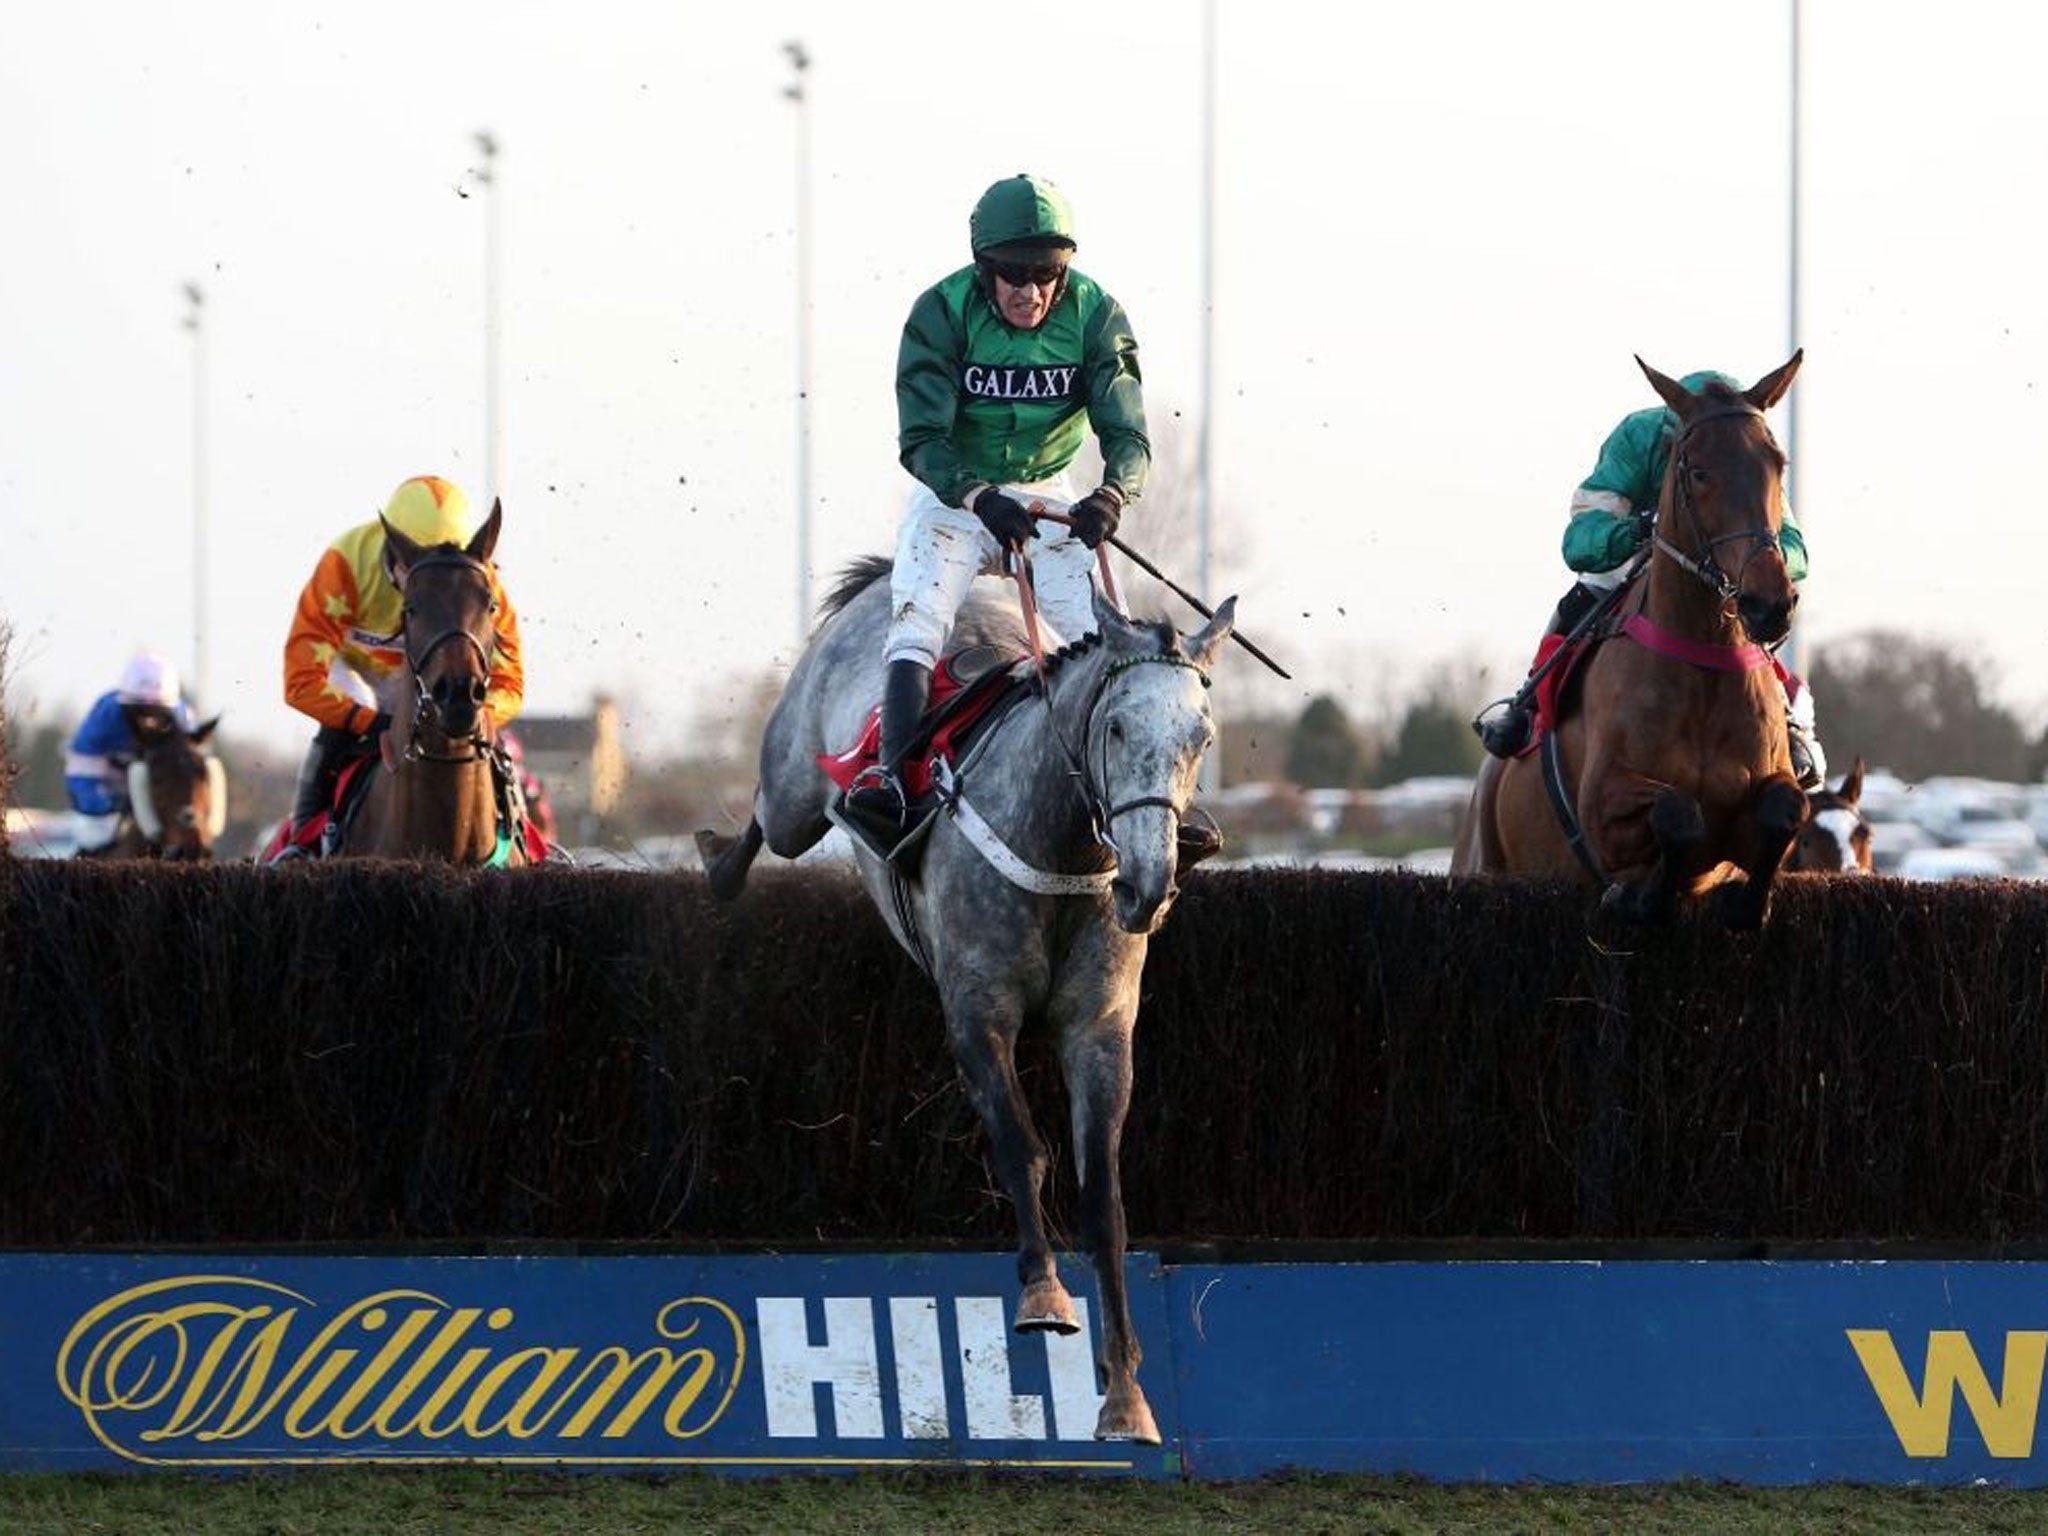 William Hill's online business was a faller during James Henderson's tenure